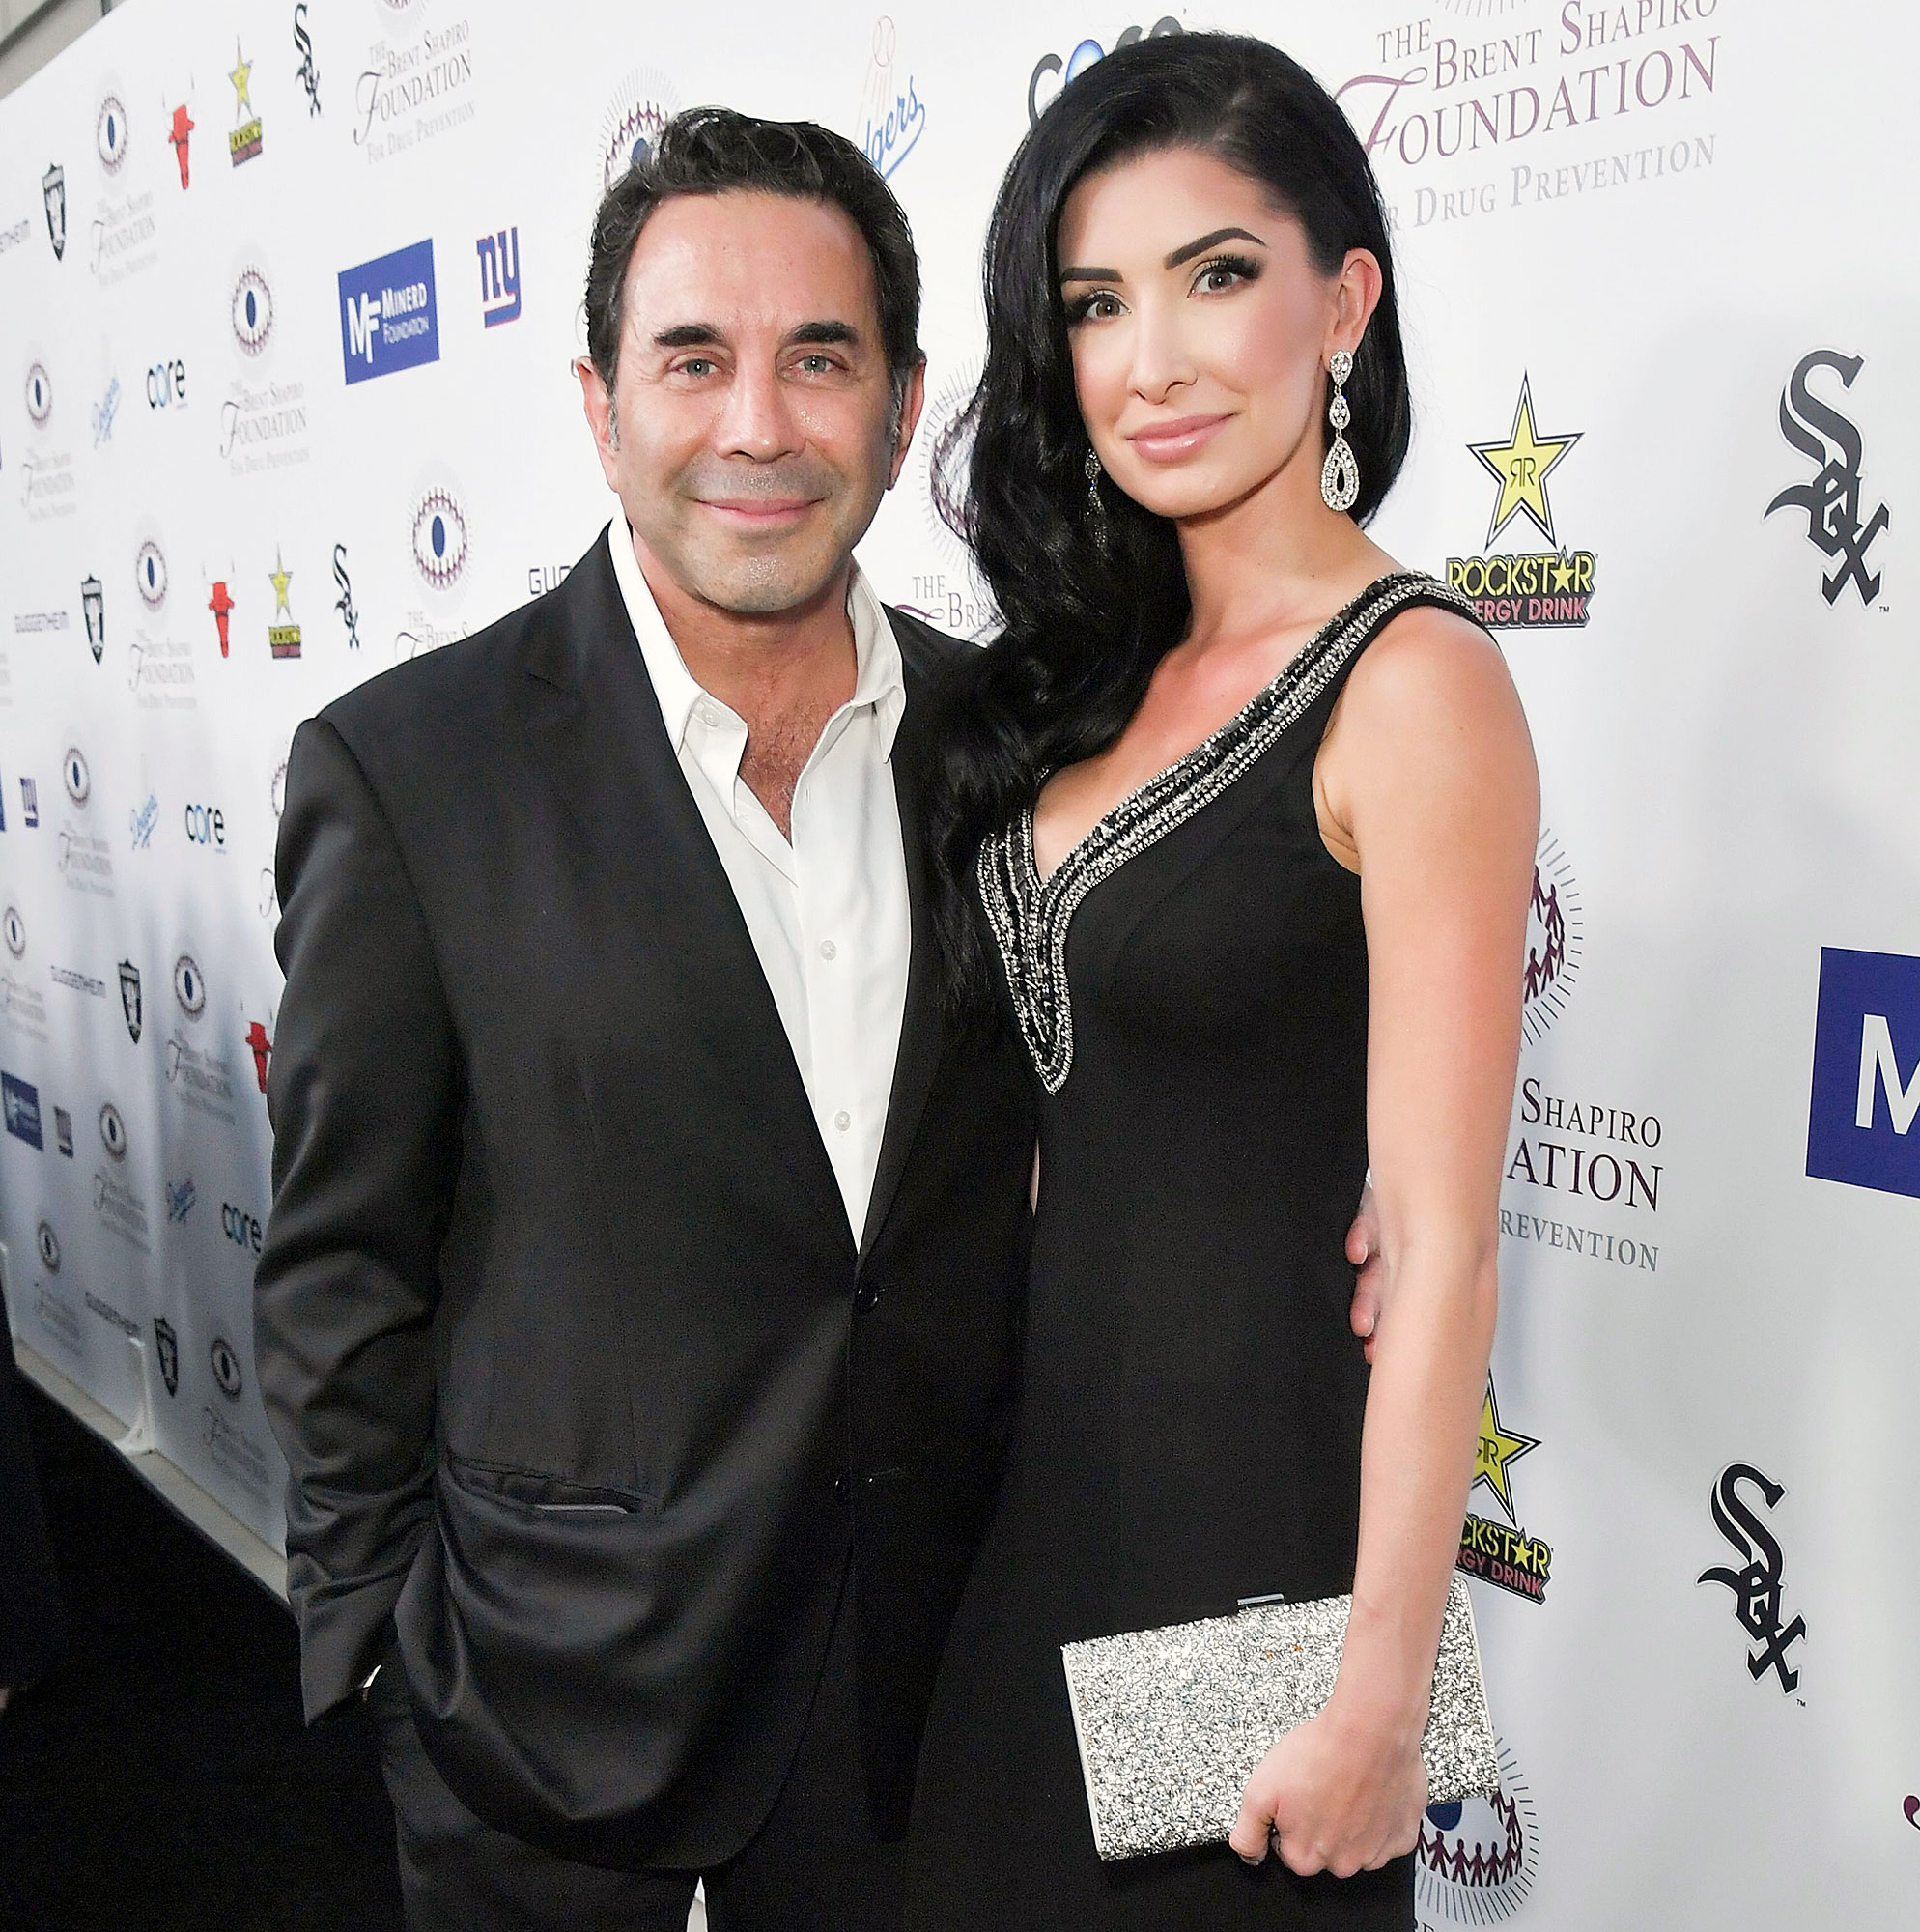 Paul Nassif - Doctor, Personality